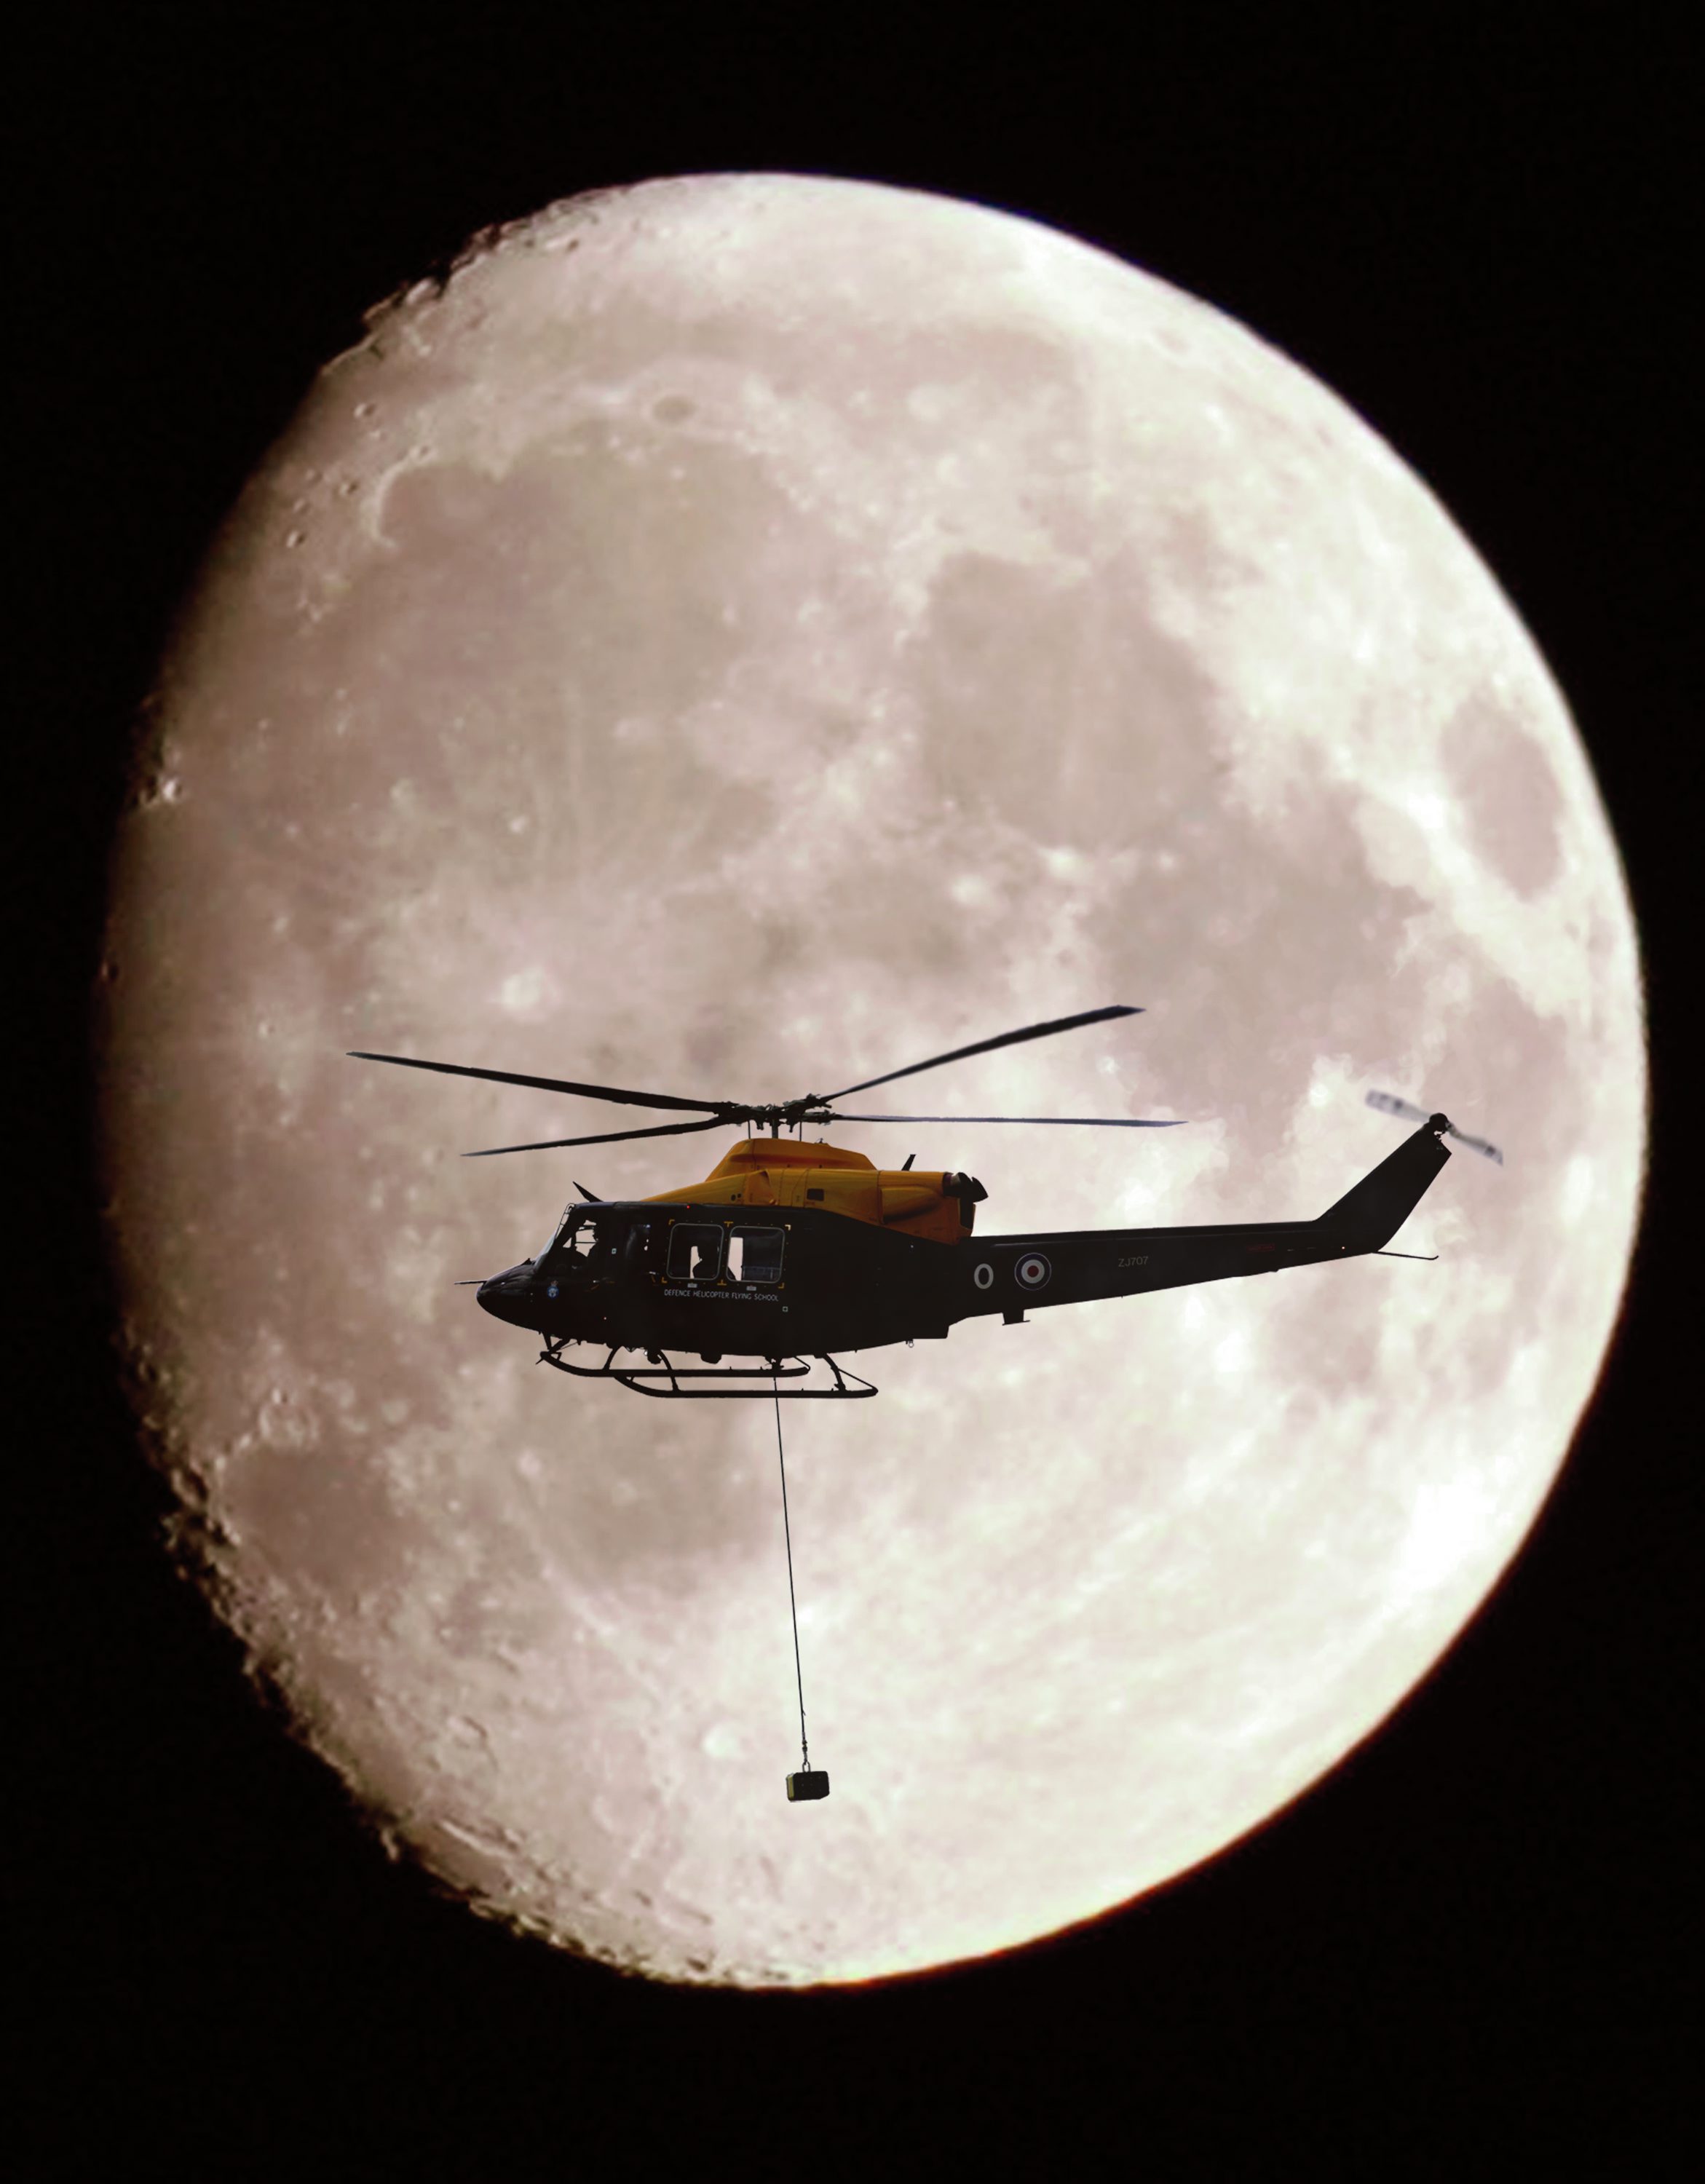 A Griffin Helicopter, with an underslung load, shown in silhouette against a full moon